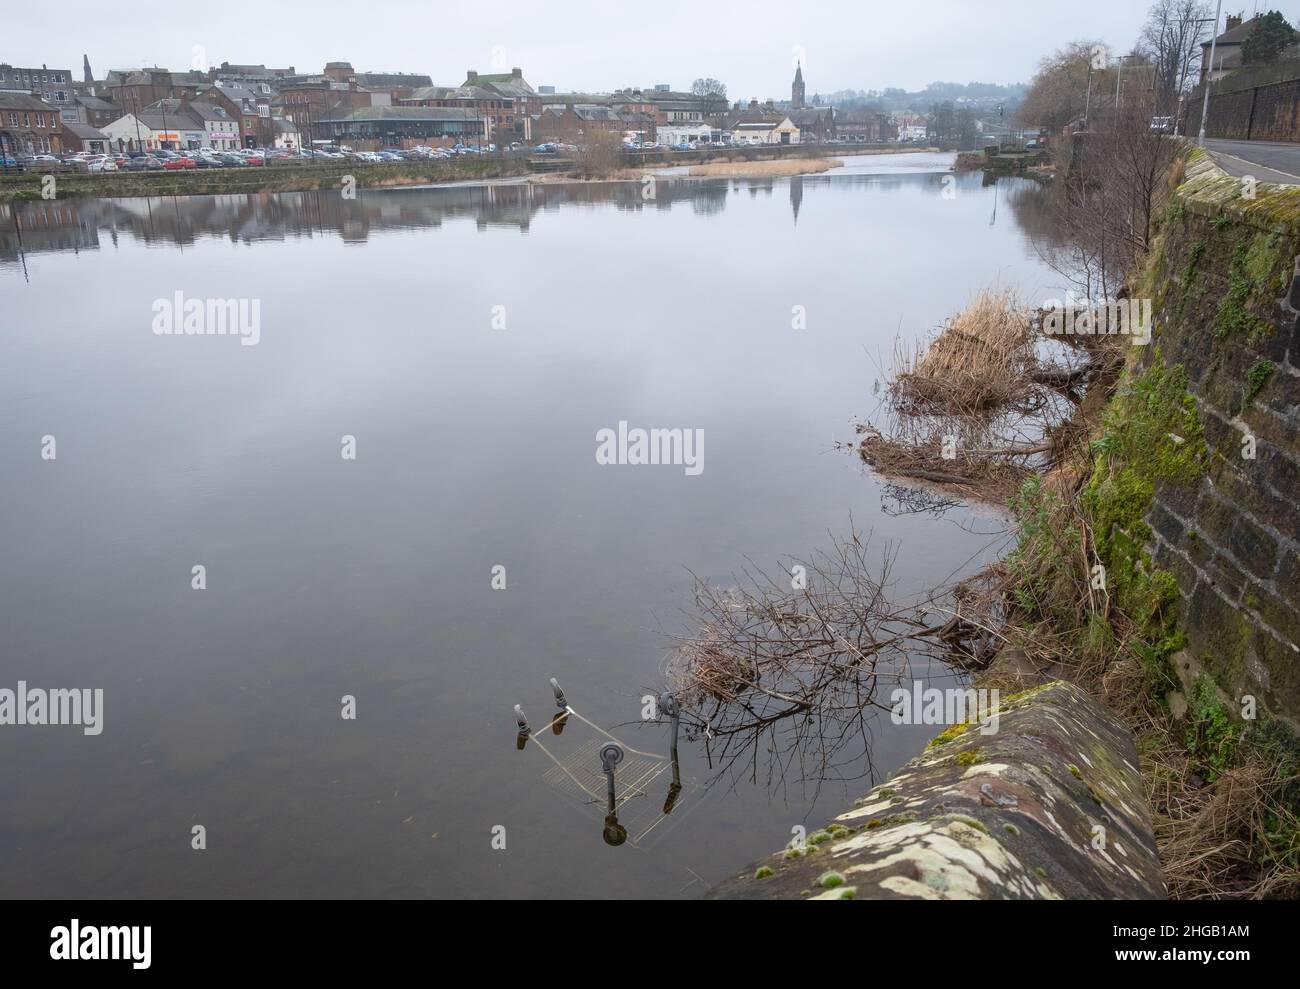 A view of the River Nith in Dumfries, Scotland with a shopping trolley and debris in the foreground. Stock Photo